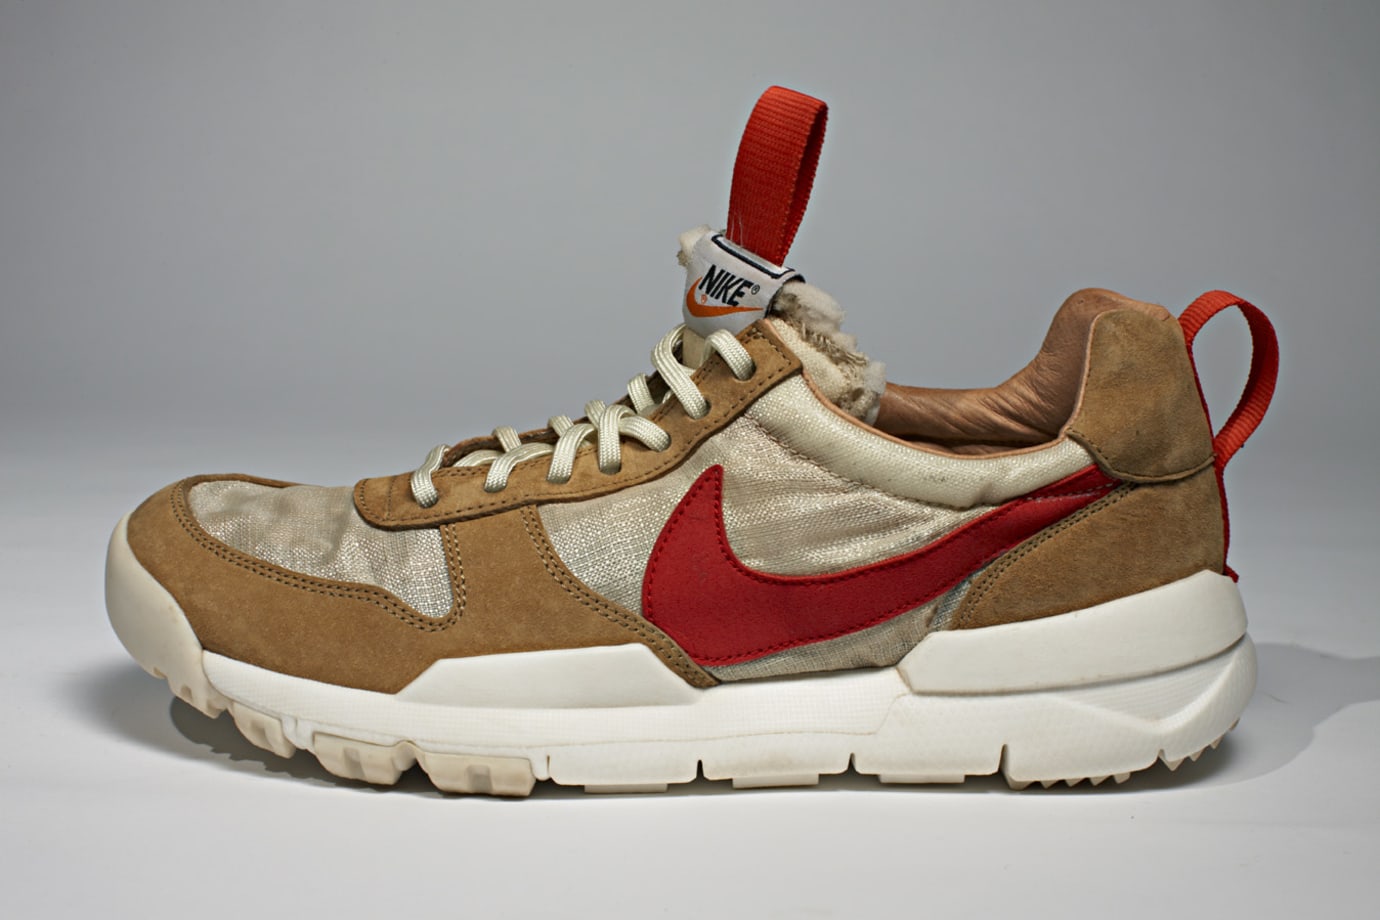 Tom Sachs Interview Nike Mars Yard 2.0 Space Camp | Sole Collector